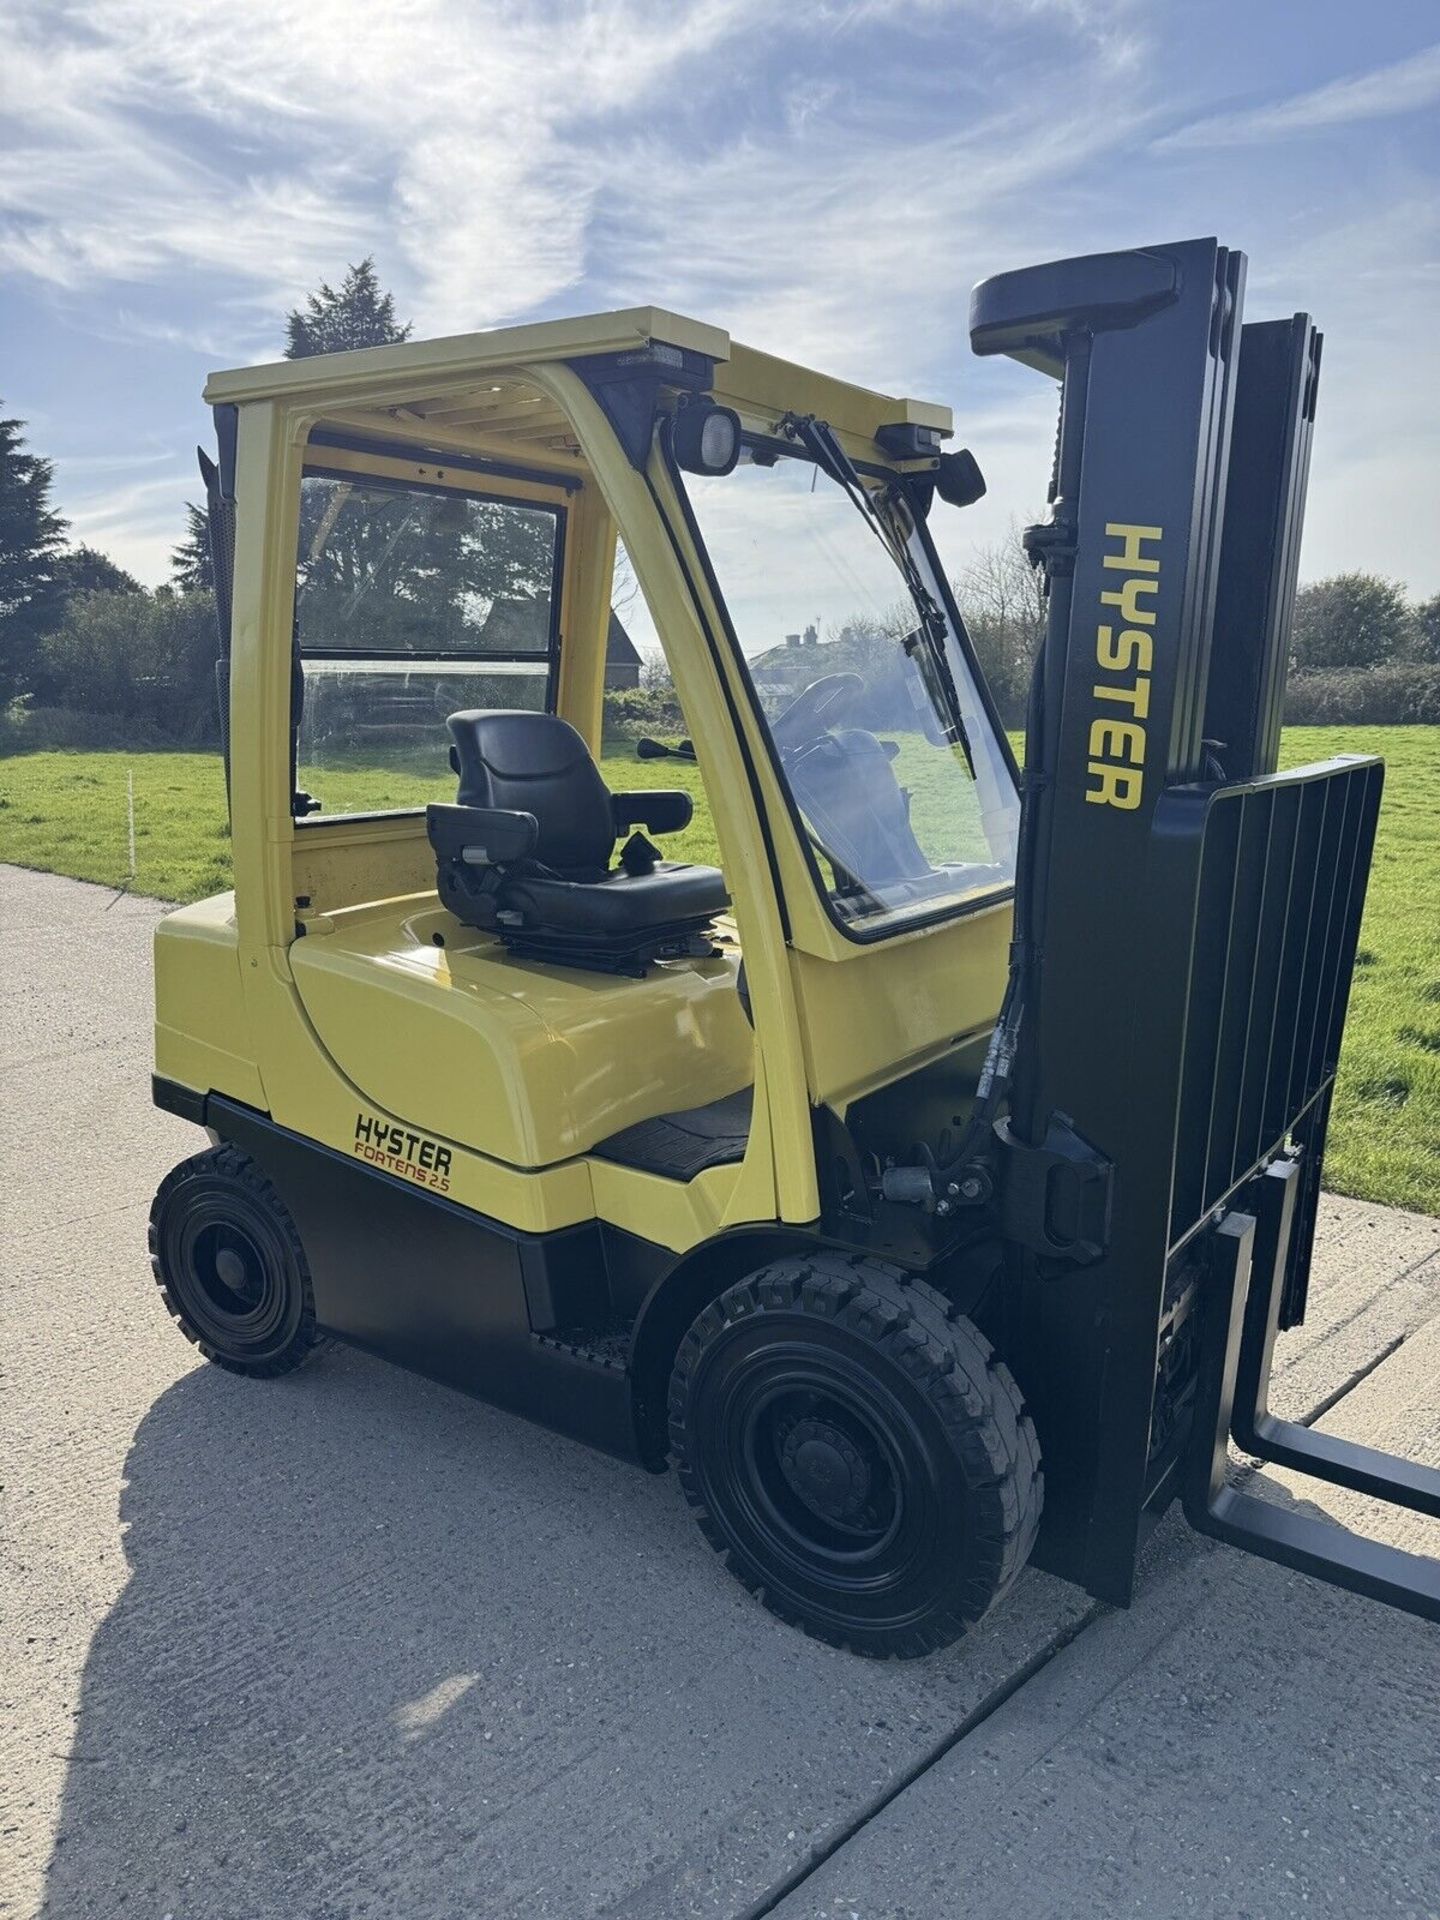 2008 - HYSTER, 2.5 Tonne Diesel Forklift (Container Spec) - Image 3 of 5